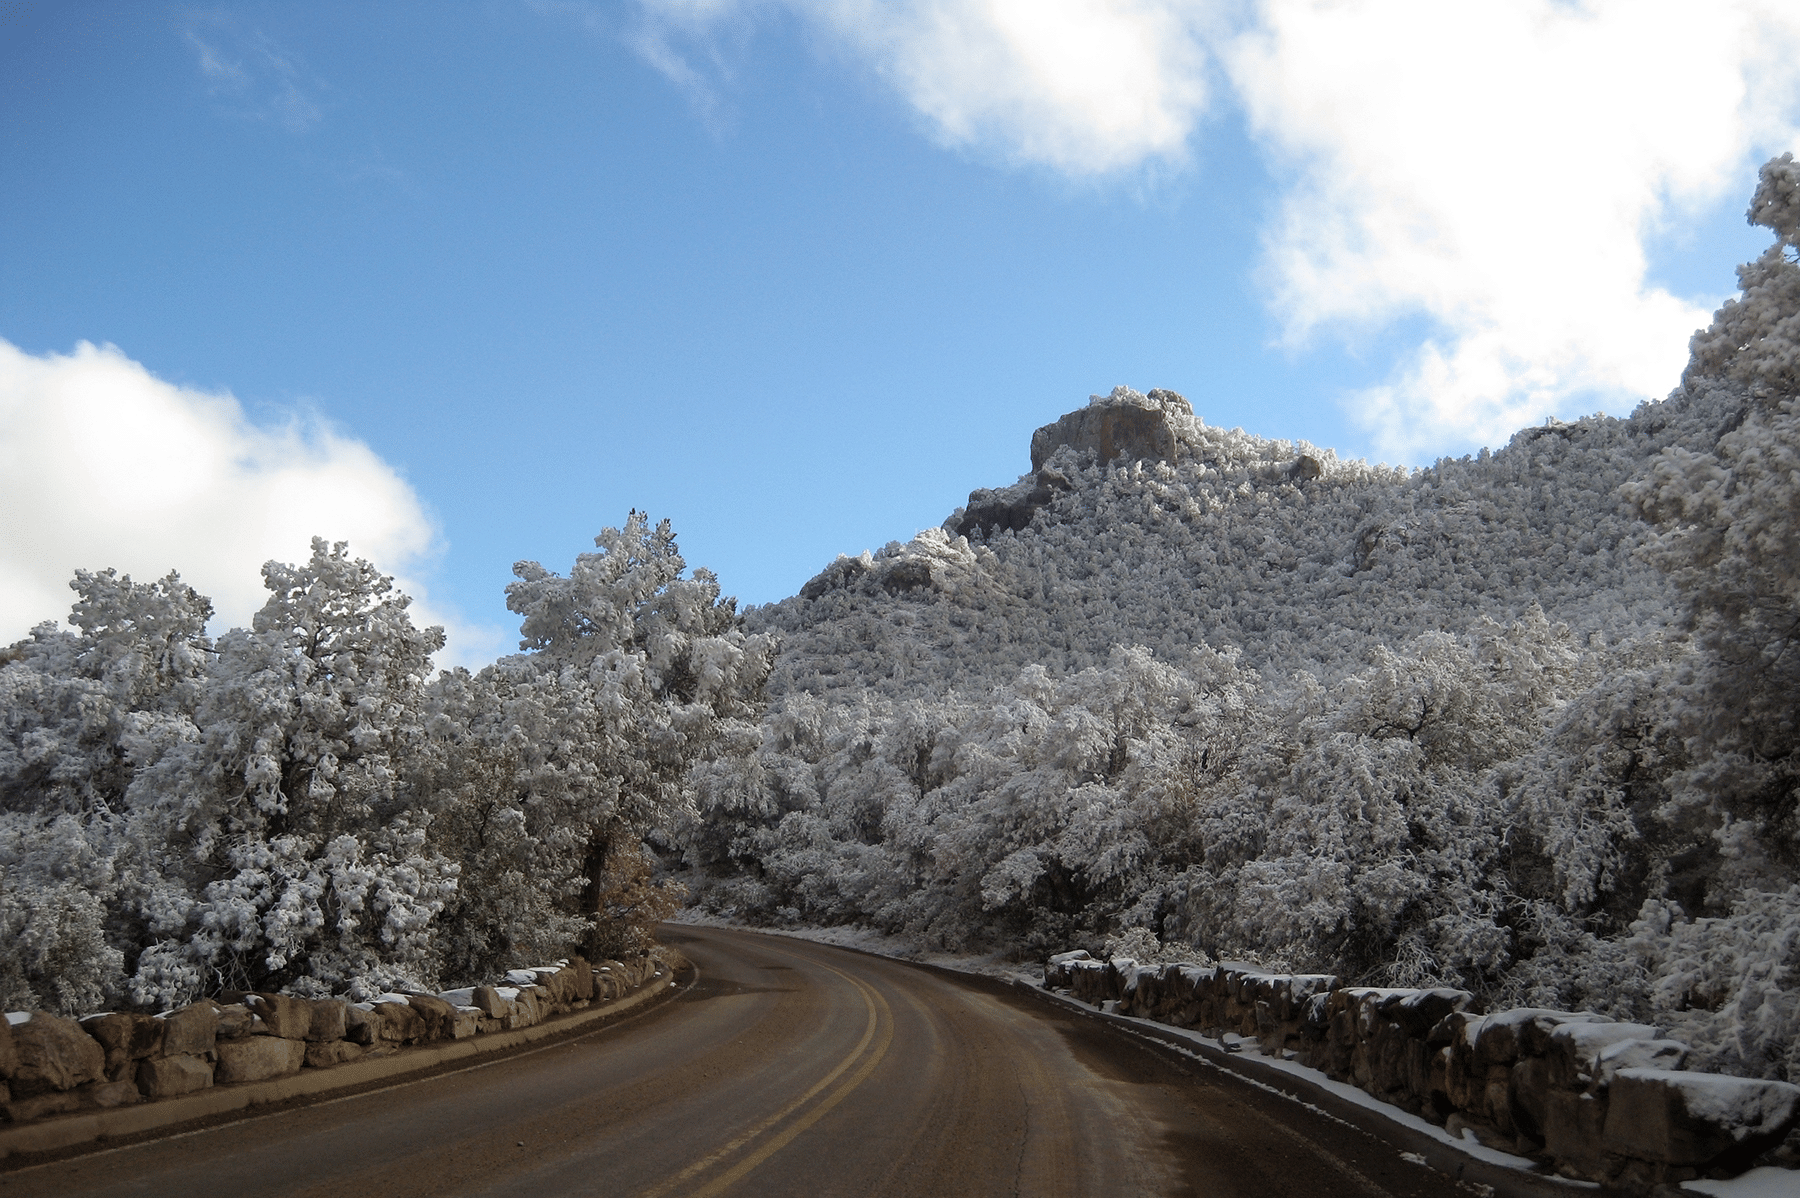 Chisos Basin Road in Winter Storm in Big Bend National Park


